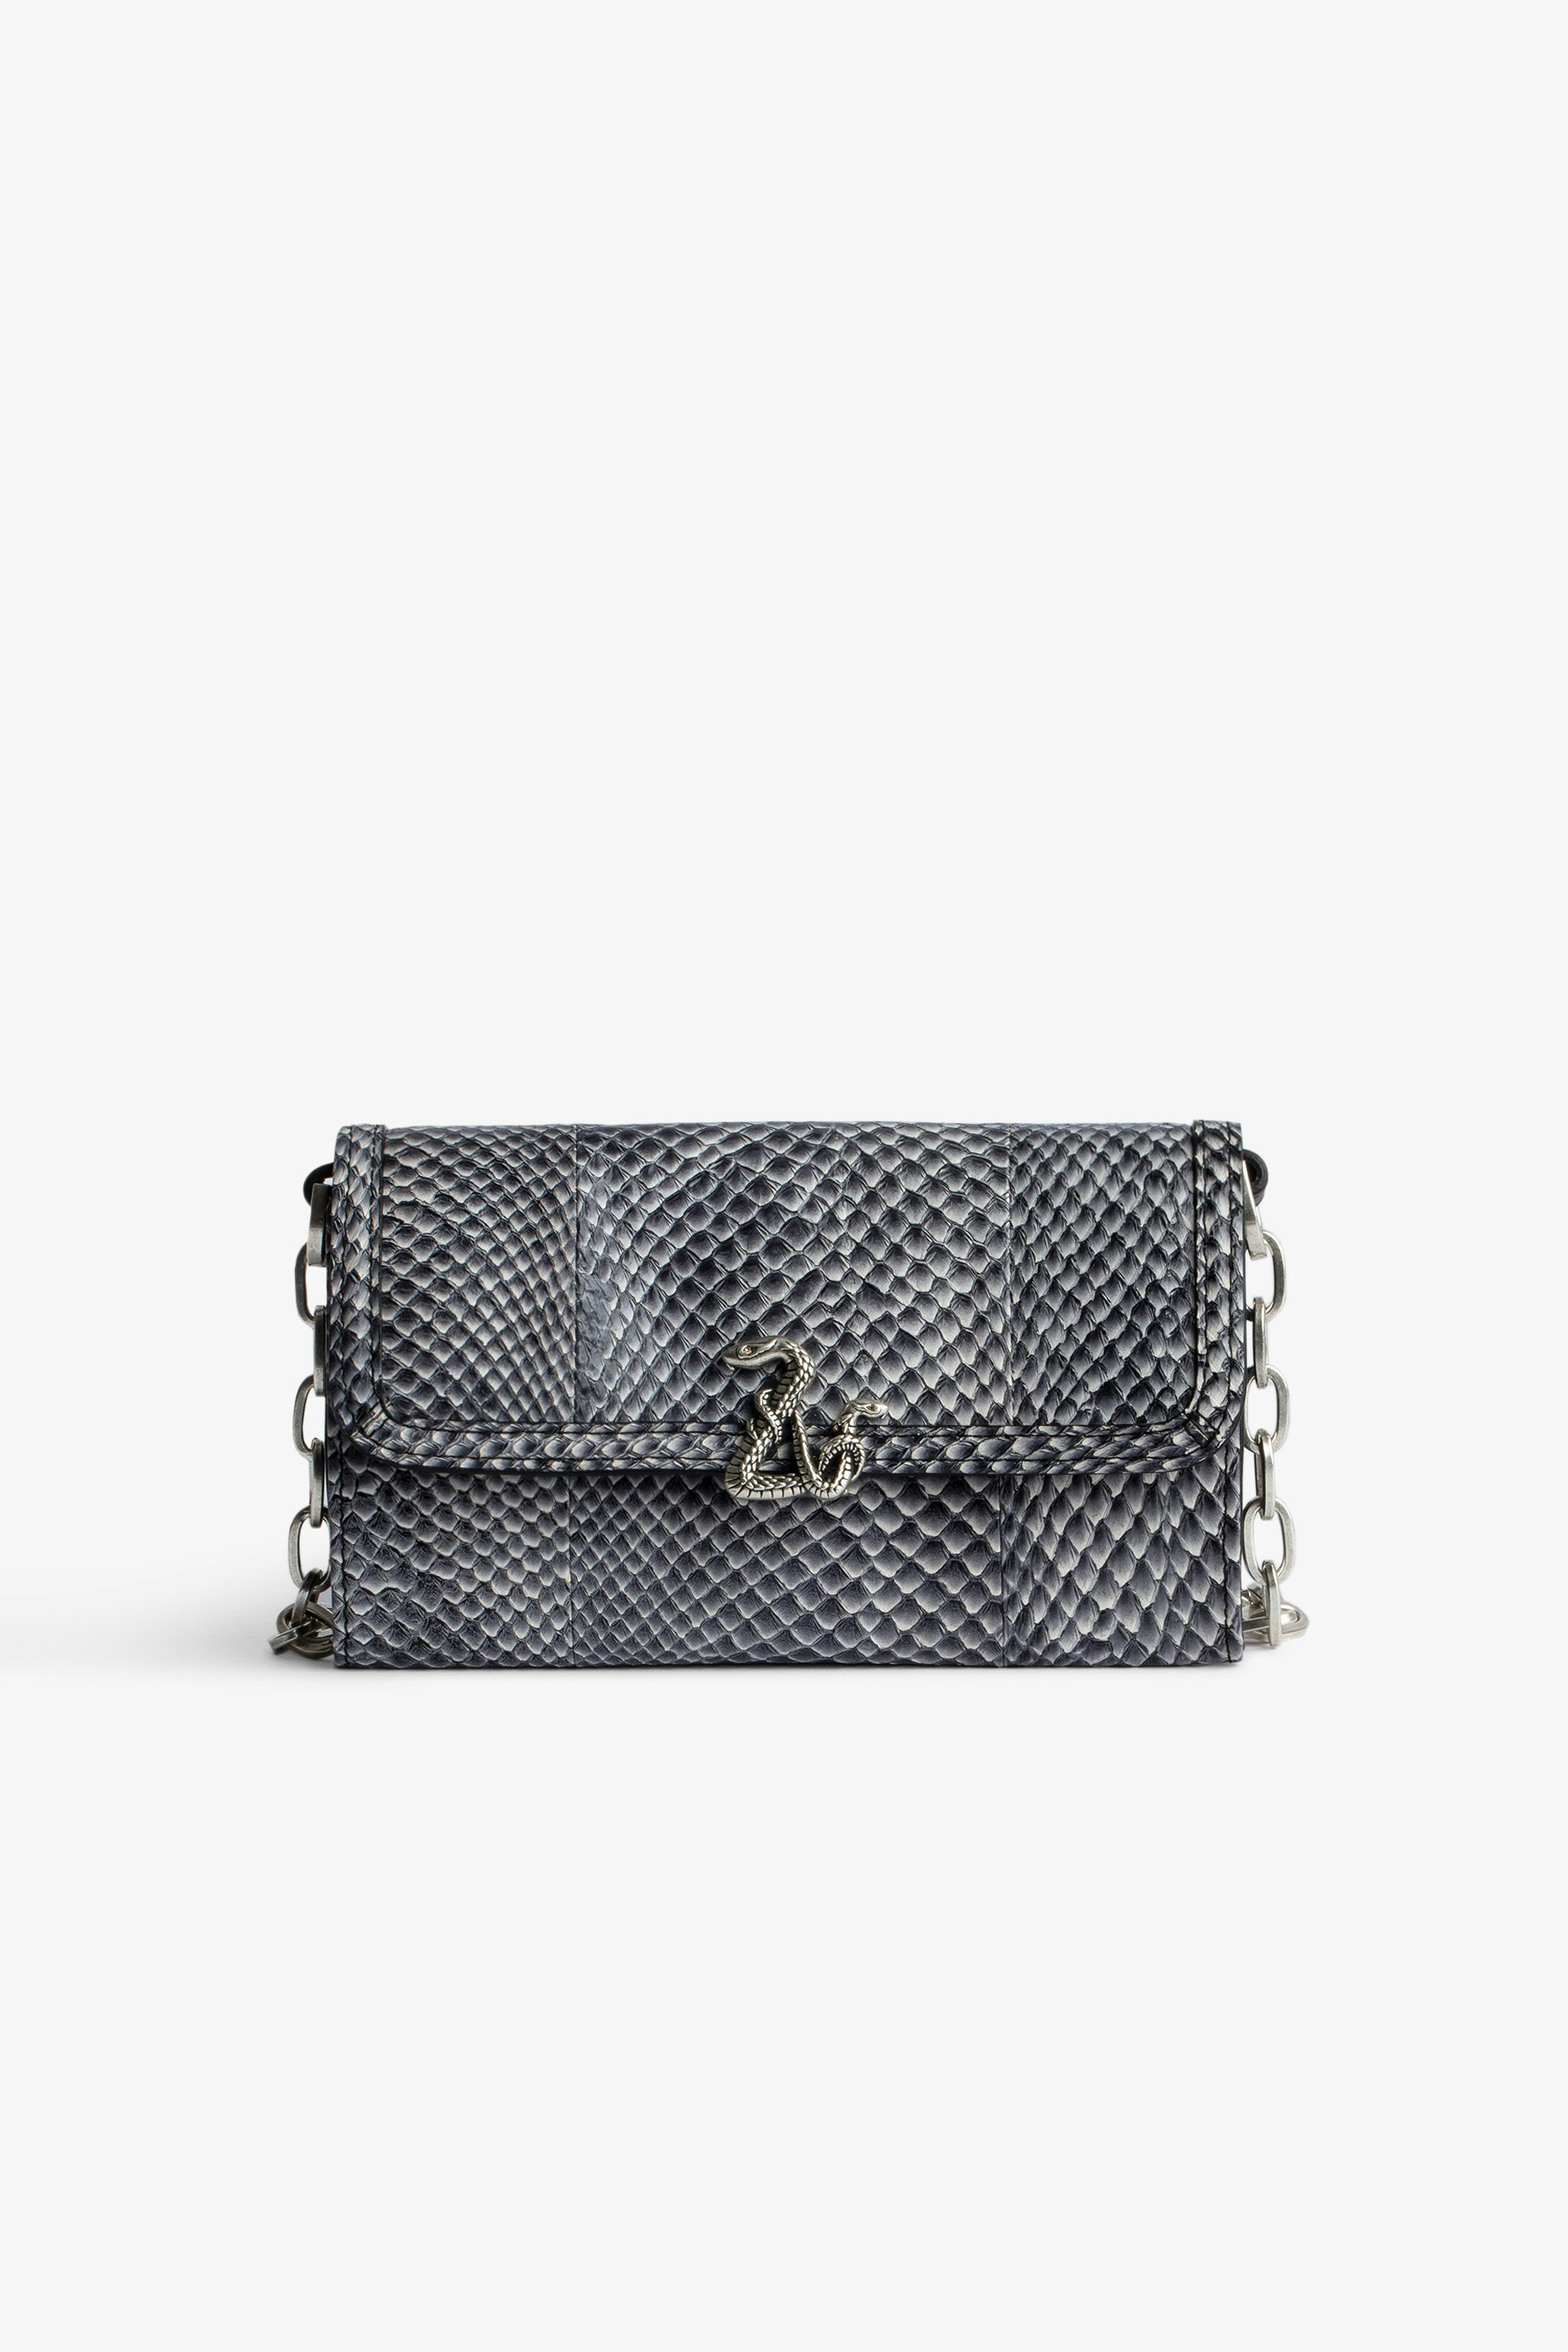 ZV Snake Le Long Wallet Women’s black python-embossed leather wallet with ZV snake